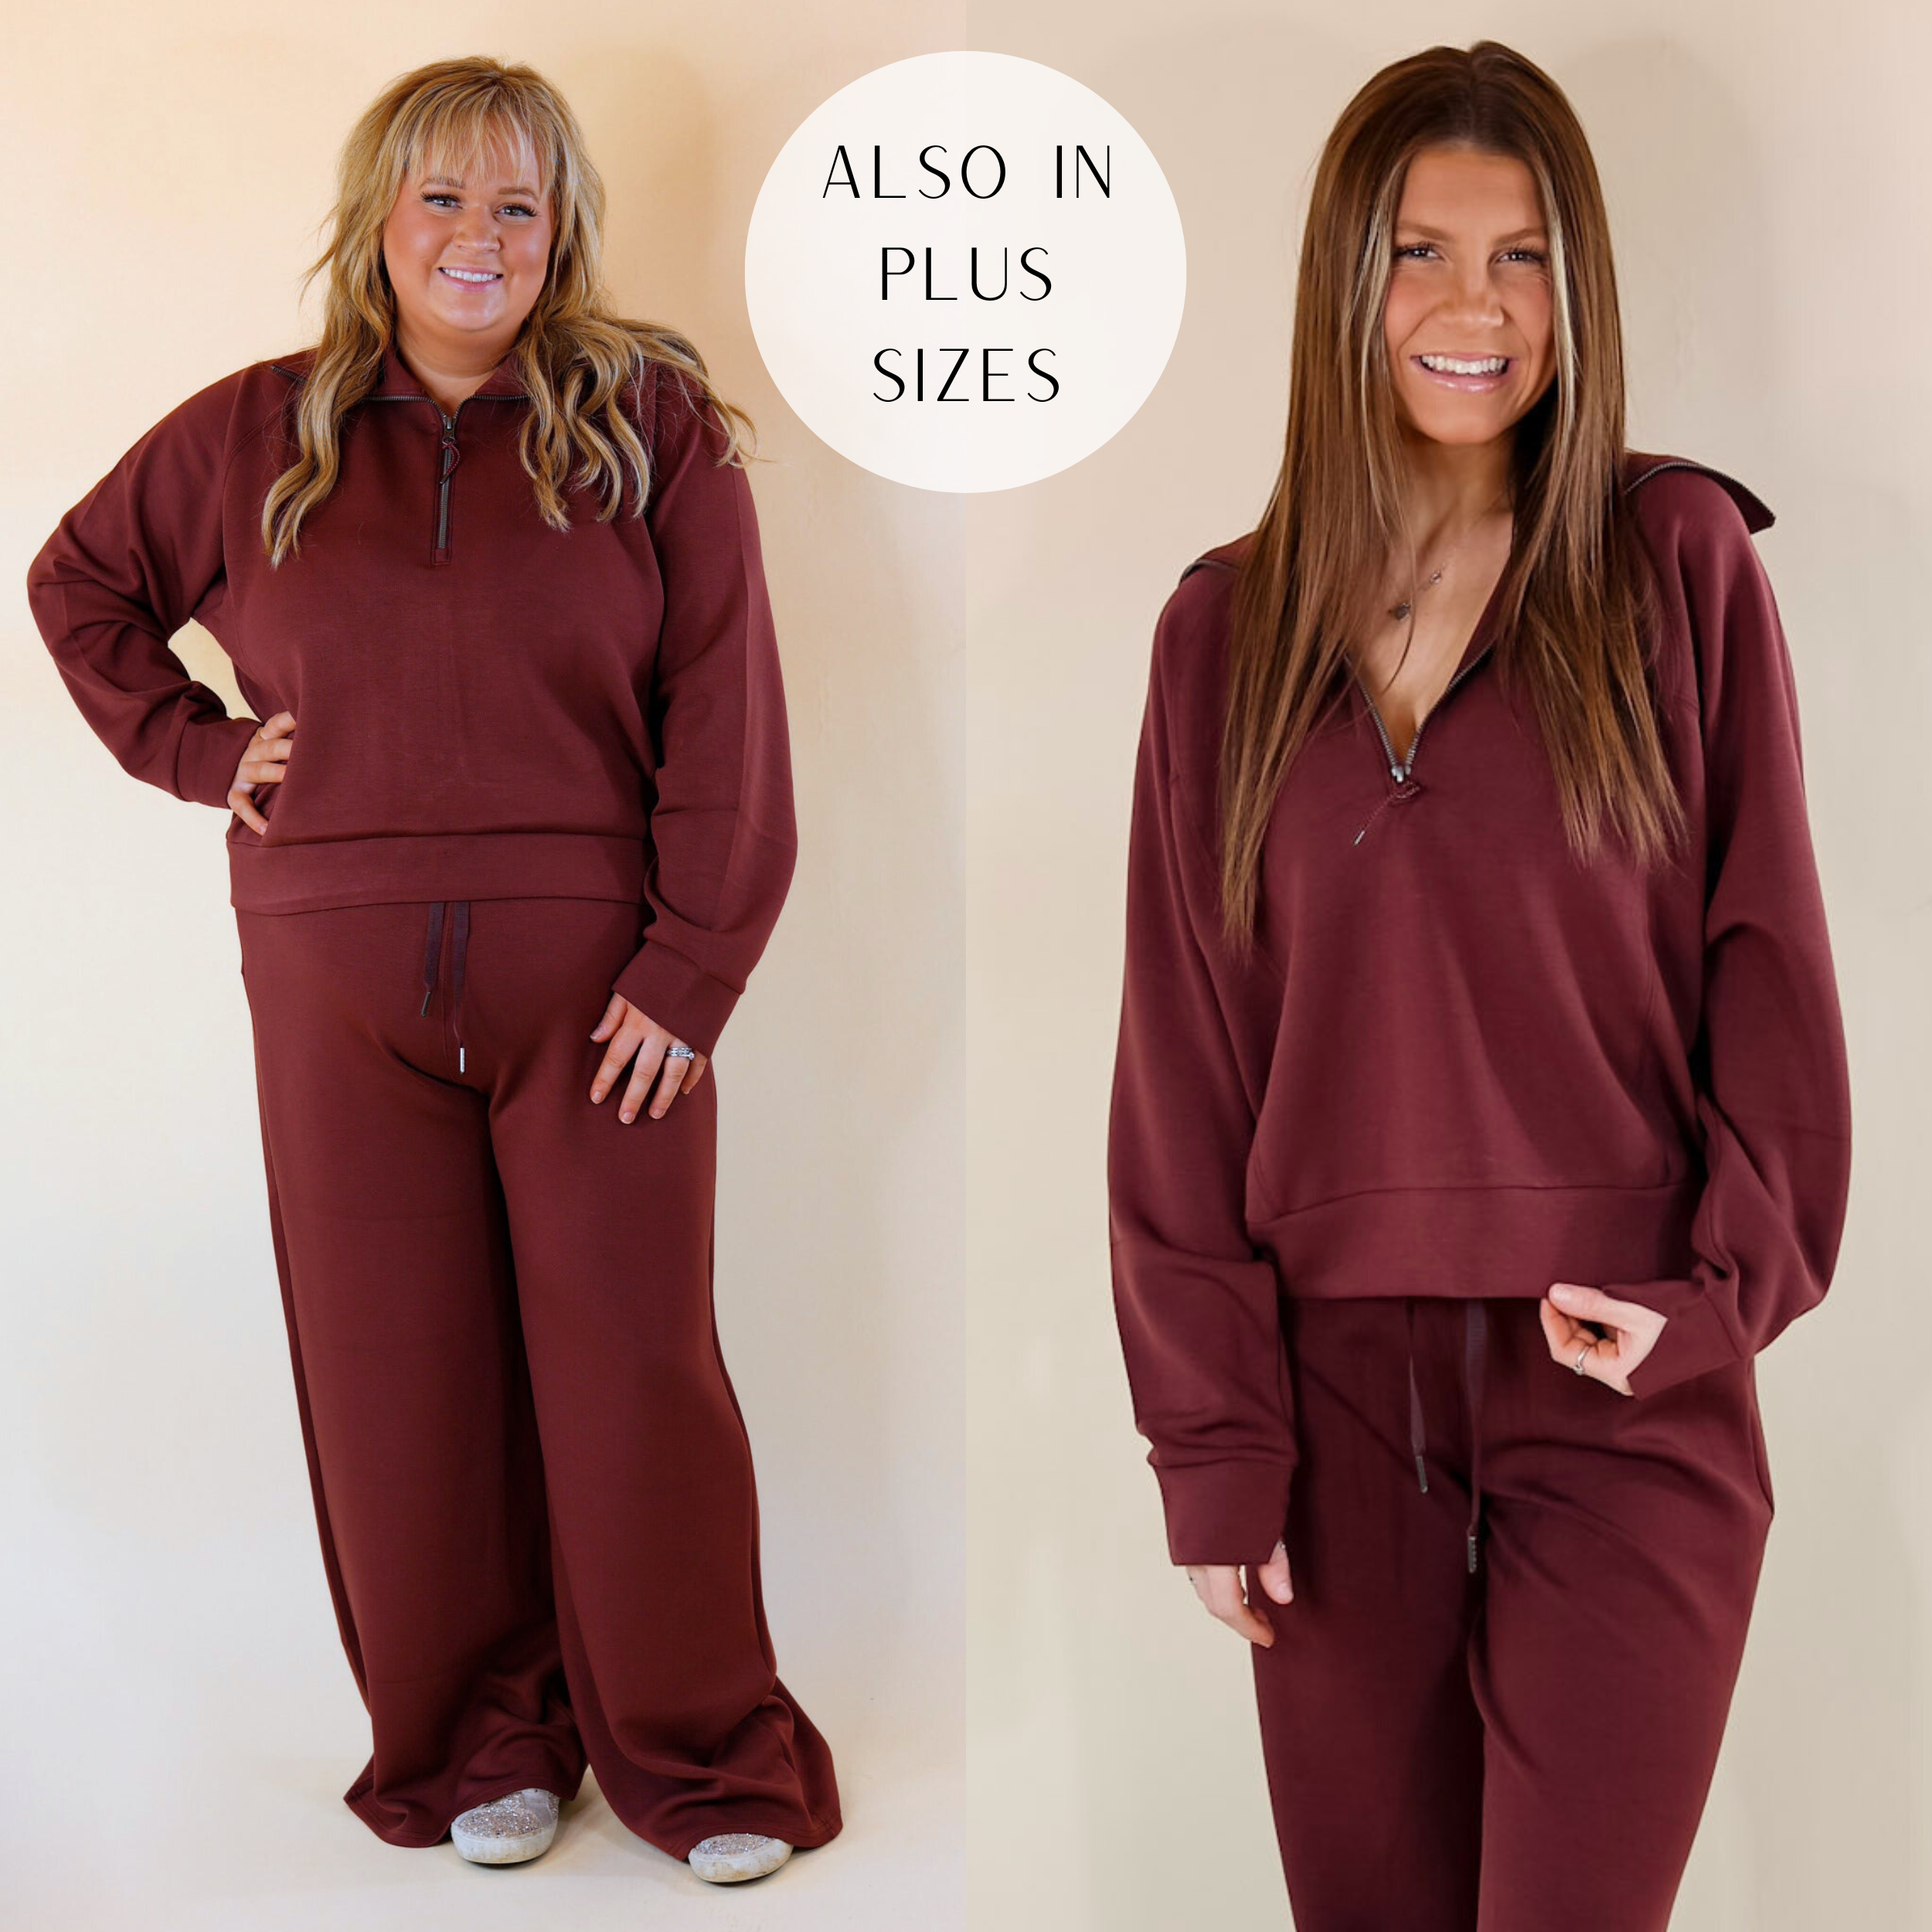 Models are wearing a maroon half zip sweatshirt. Size plus and small both have it paired with the matching pants, Vintage Havanas, and silver jewelry. 